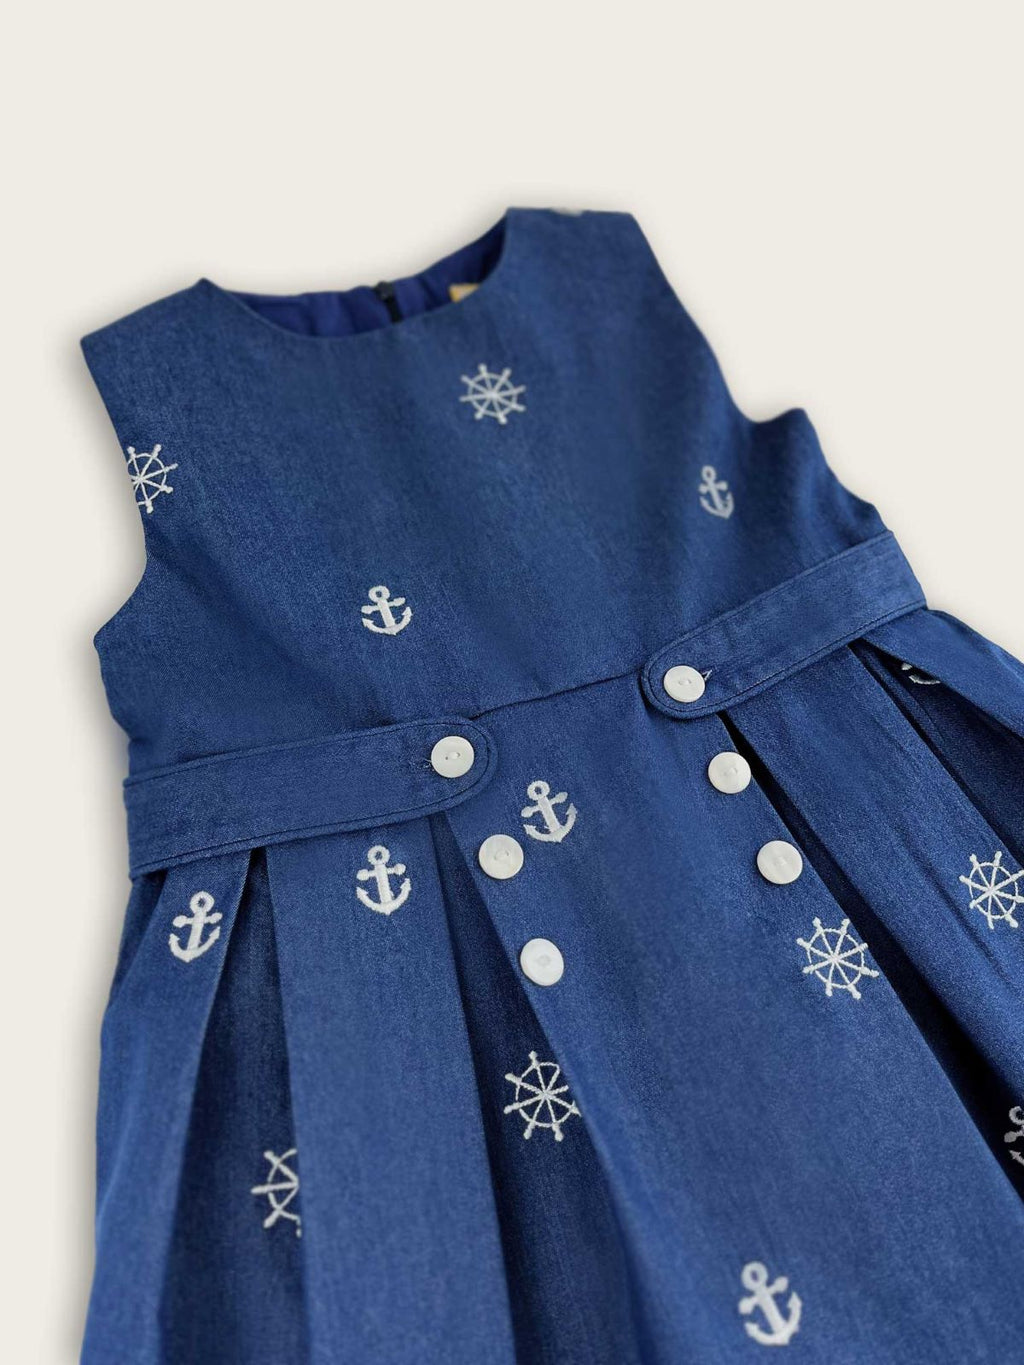 Blue nautical denim girls dress featuring white embroidered anchor and ships wheel motifs